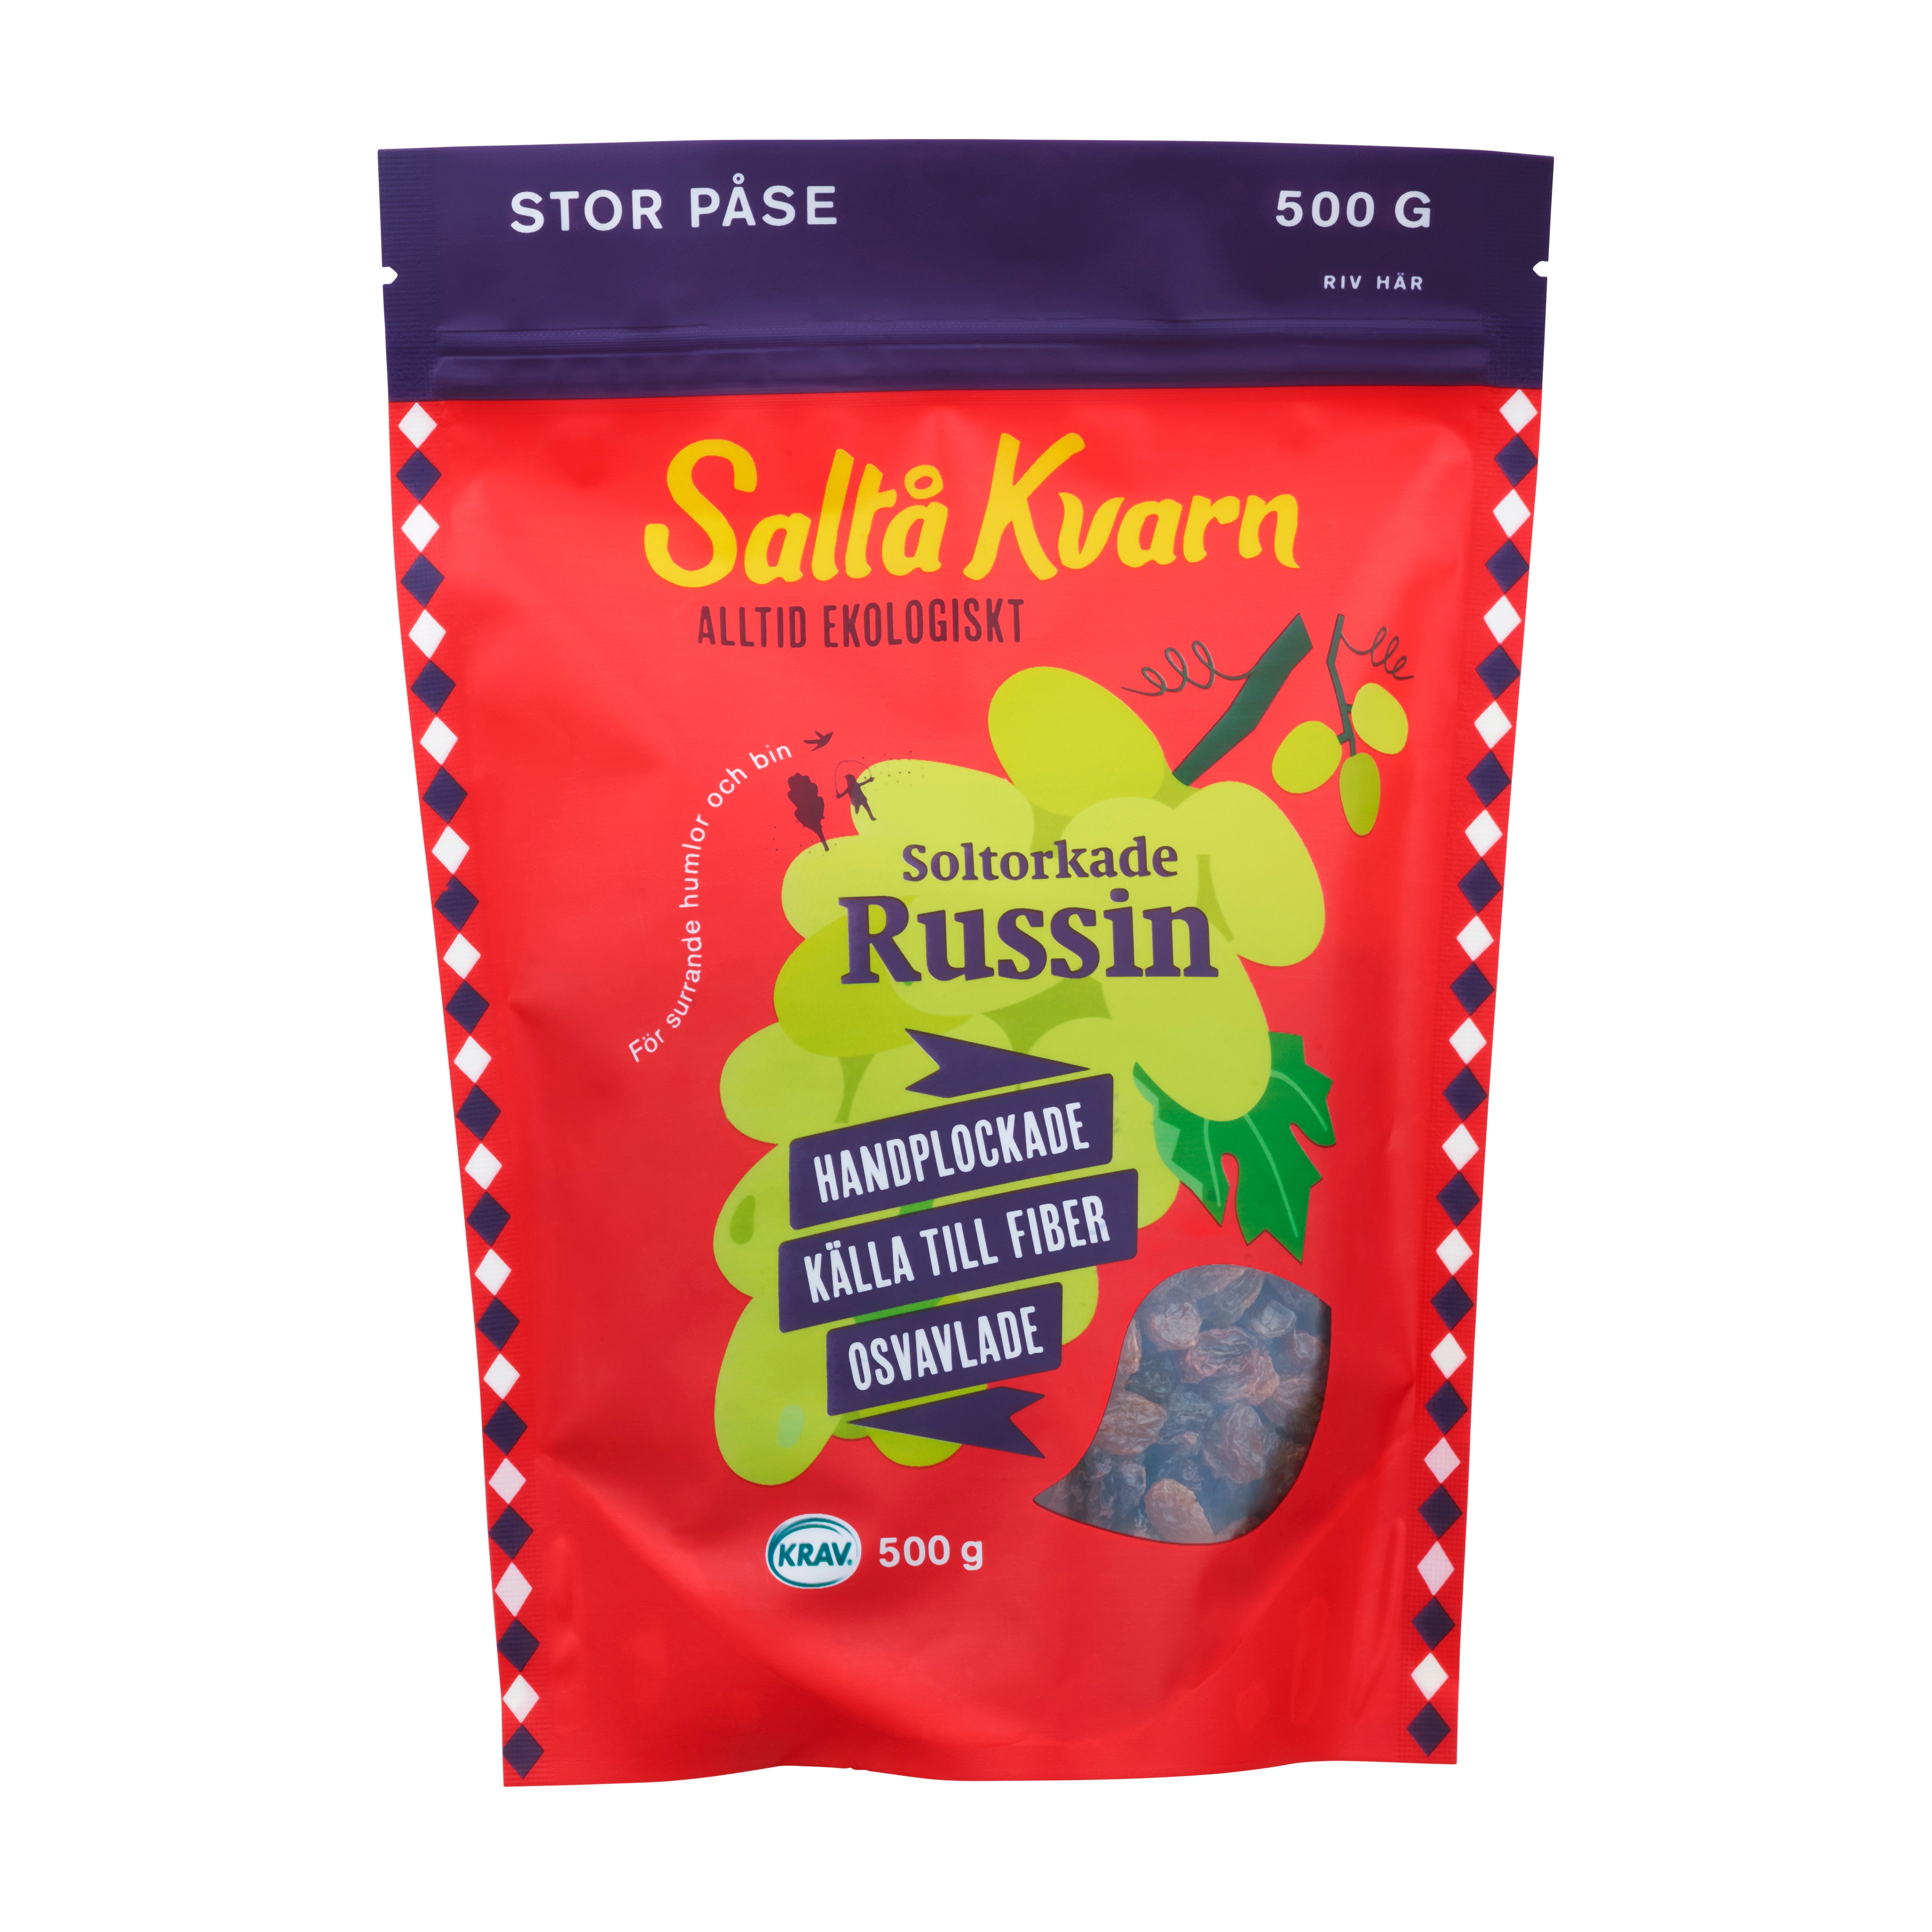 Russin 500g